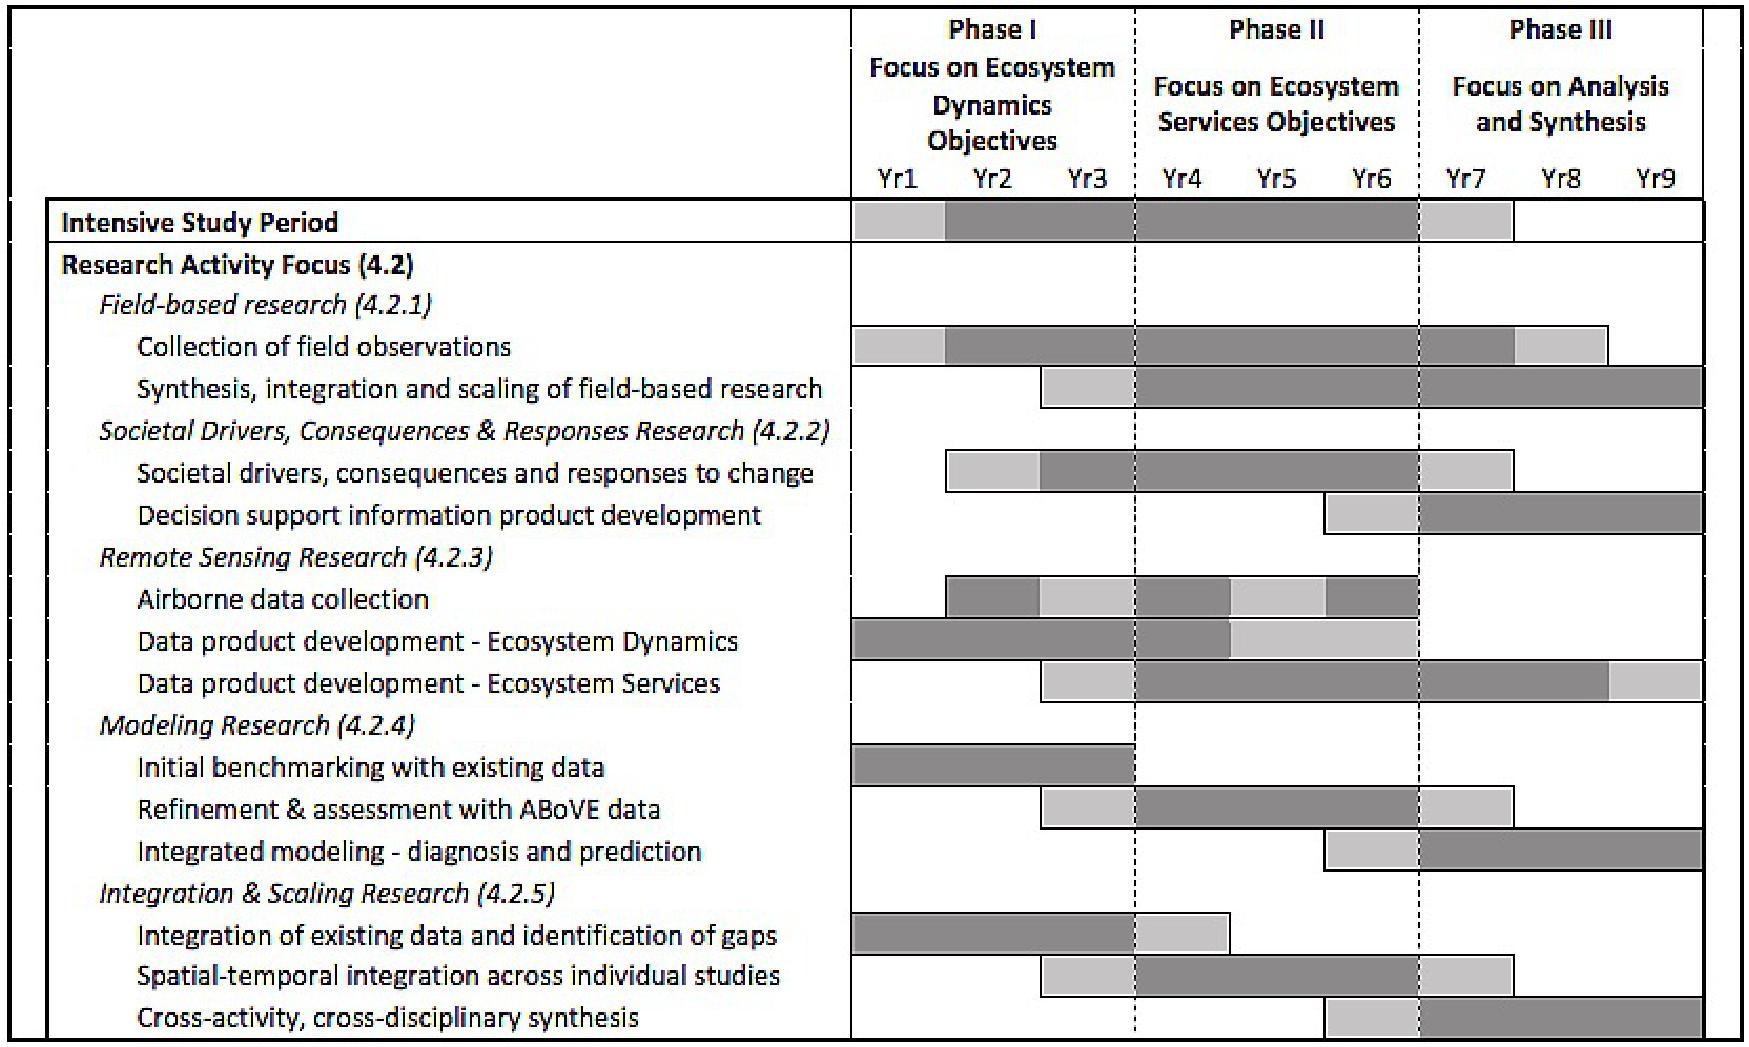 Table 1: Schedule for Research Activities required for ABoVE that would be carried out over the timeline of the Field Campaign to address the objective-driven focus of each of three Phases of research. The darker shade of gray indicates when more intensive activities are expected to occur